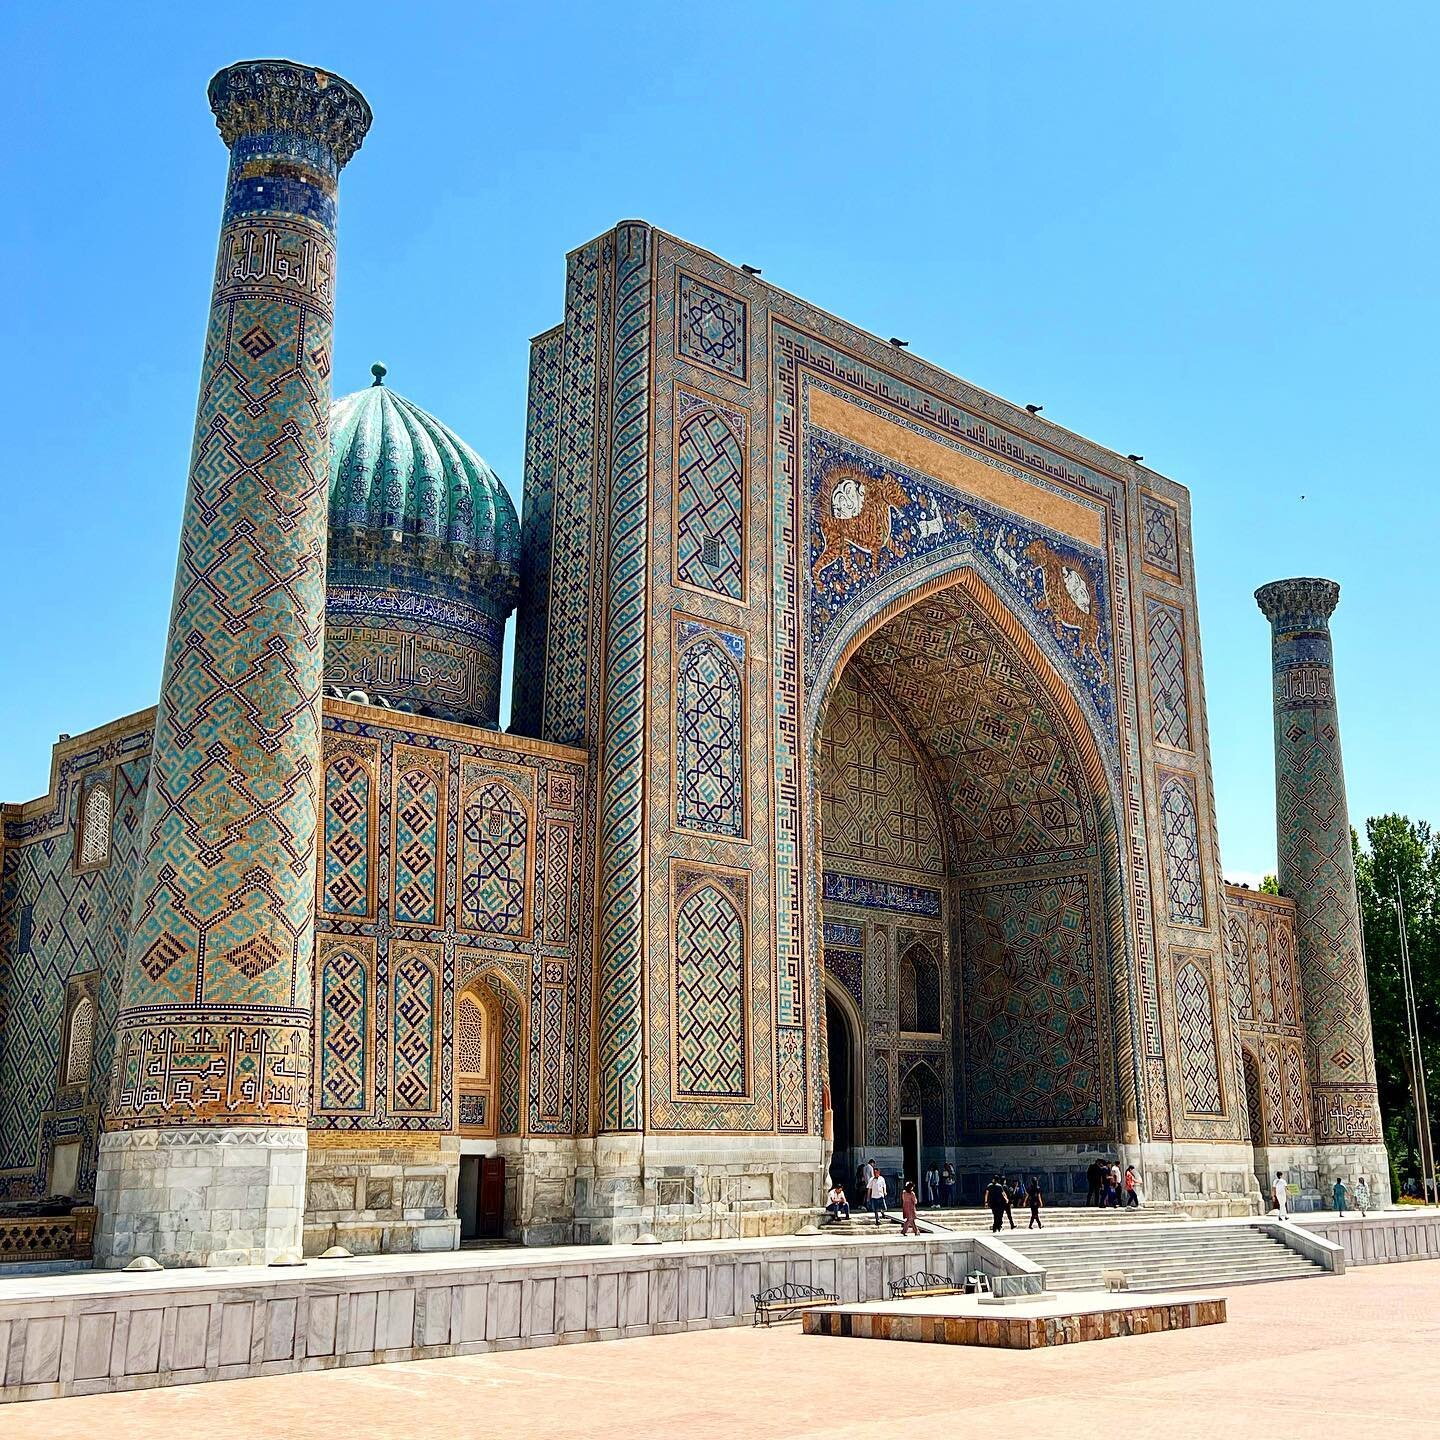 Beautiful, blue domed Samarkand, the city synonymous with the the Silk Road. 

A place that&rsquo;s been on my bucket list for over 15 years, it was a dream come true to finally visit, but no photo can do justice to its impressive, larger than life b